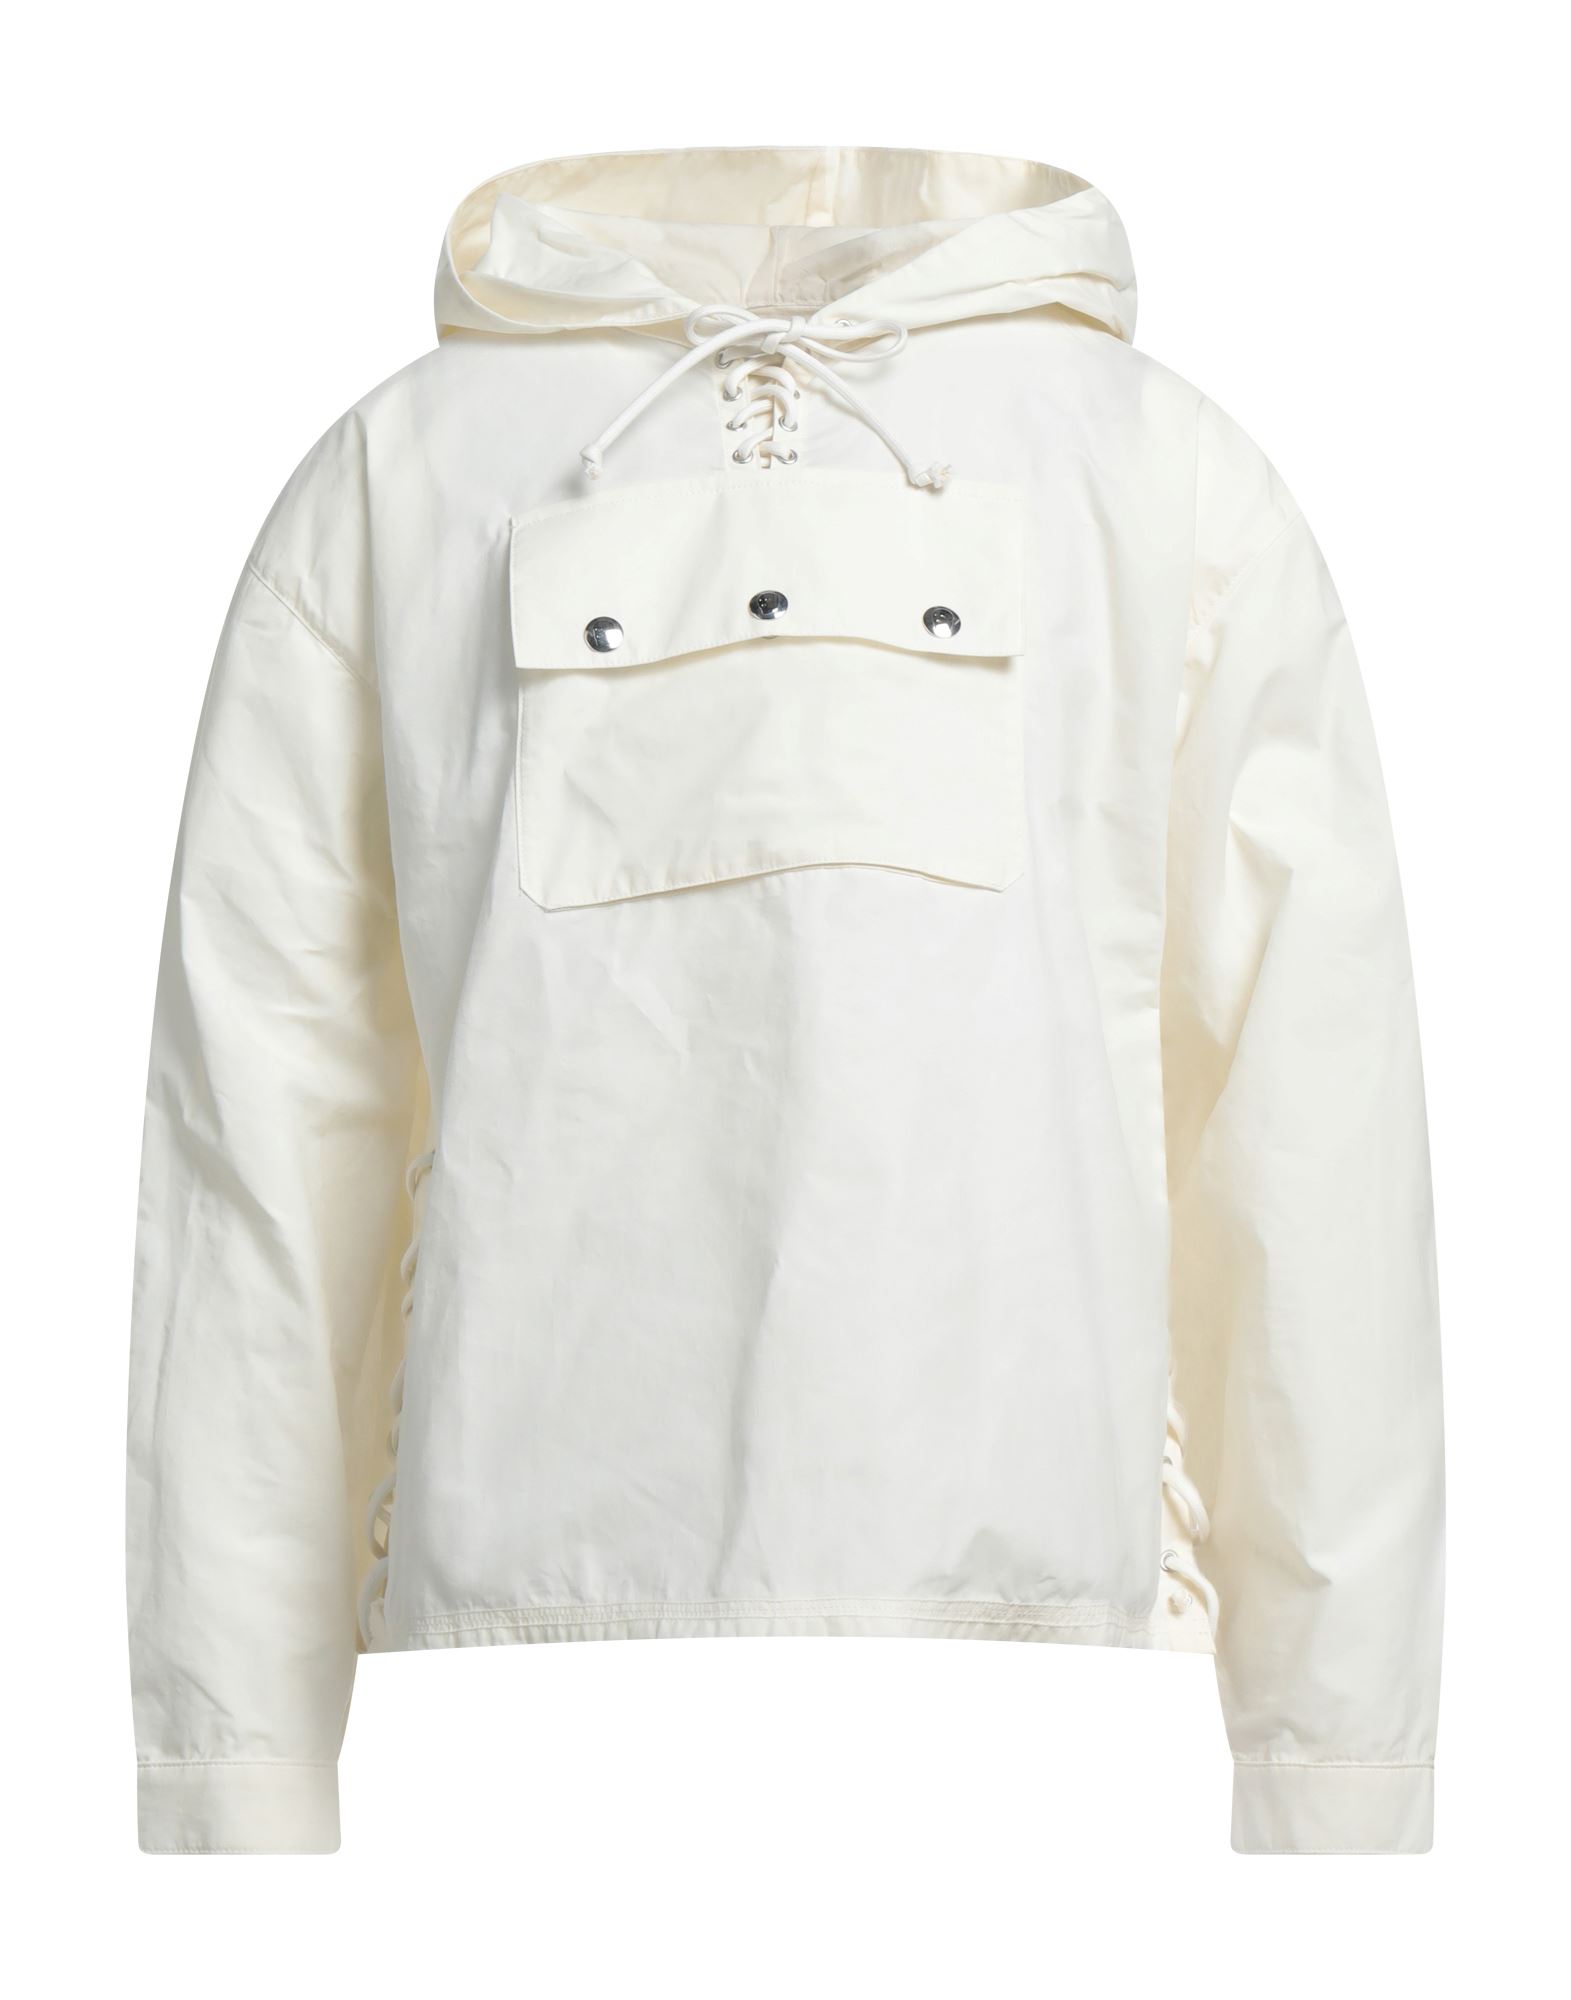 YOUTHS IN BALACLAVA YOUTHS IN BALACLAVA MAN JACKET IVORY SIZE M COTTON